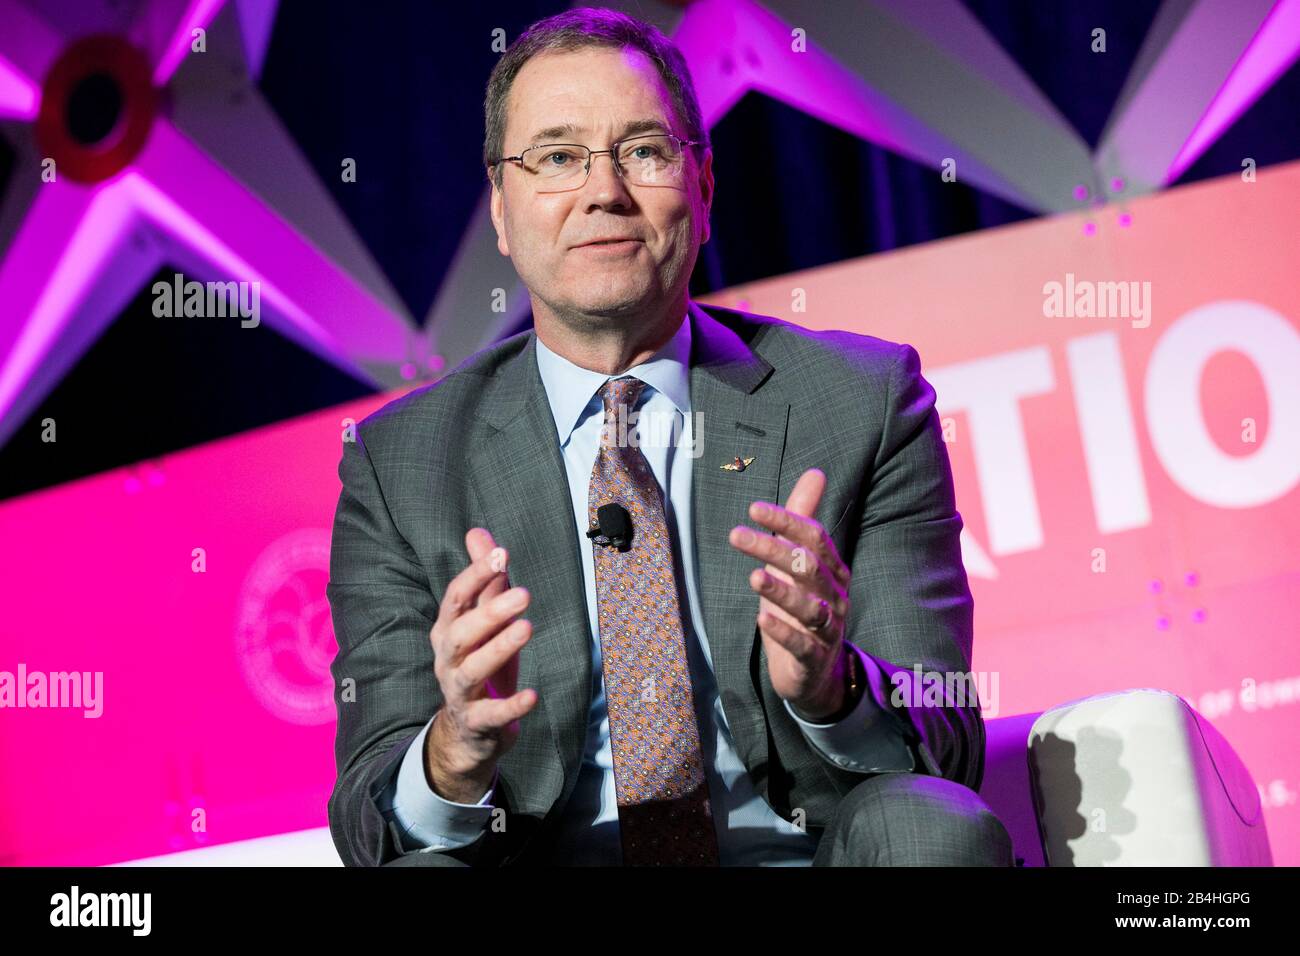 Bradley Tilden, Chairman, President, and Chief Executive Officer, Alaska Air Group, Inc., speaks at the U.S. Chamber of Commerce Aviation Summit in Wa Stock Photo